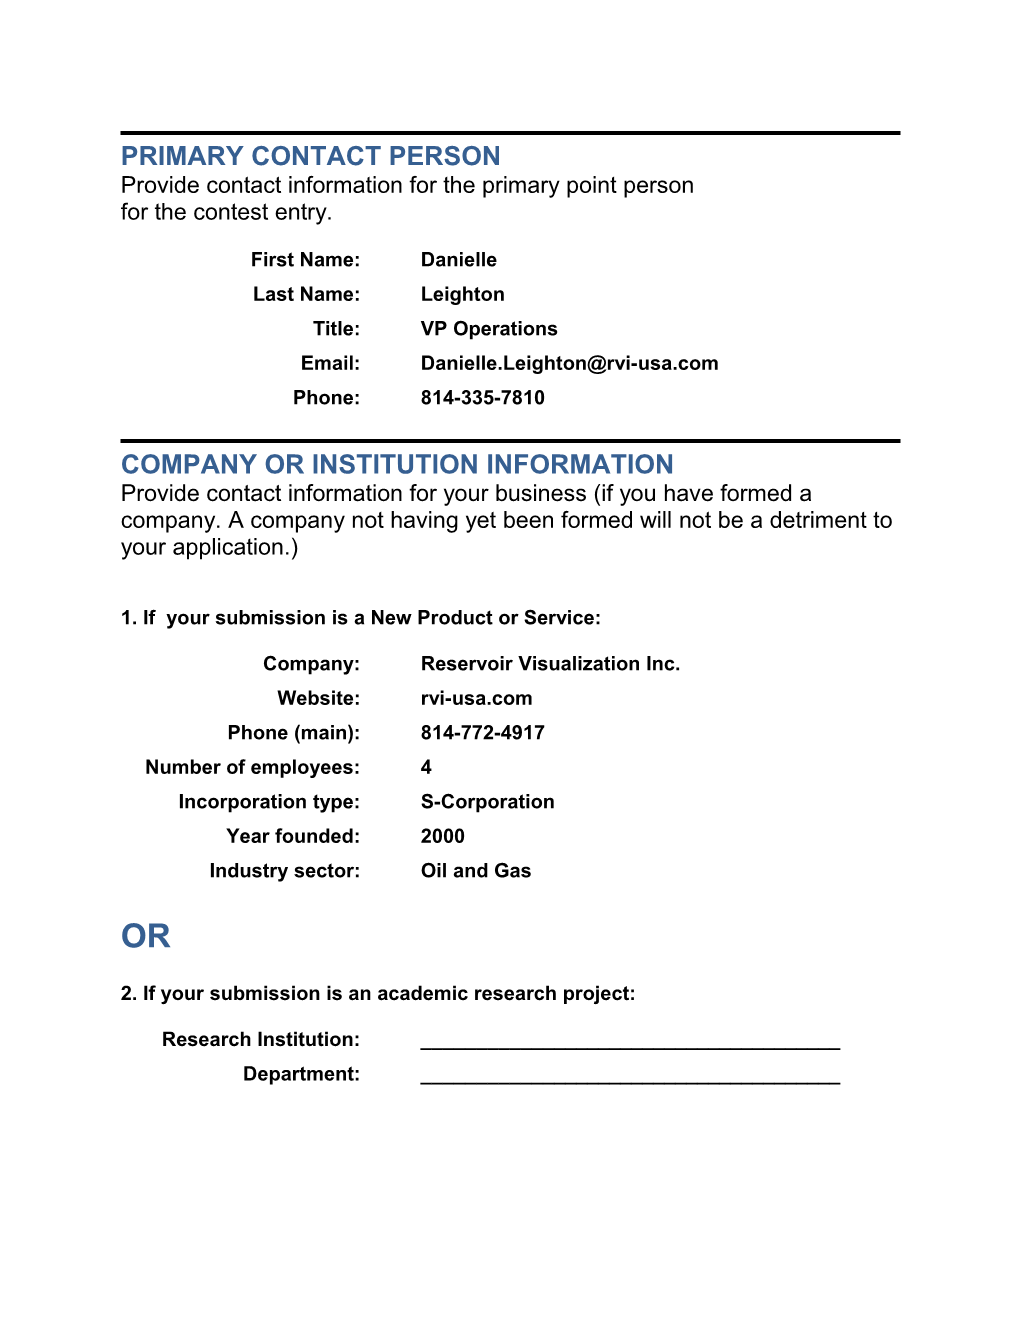 Application Cover Sheet